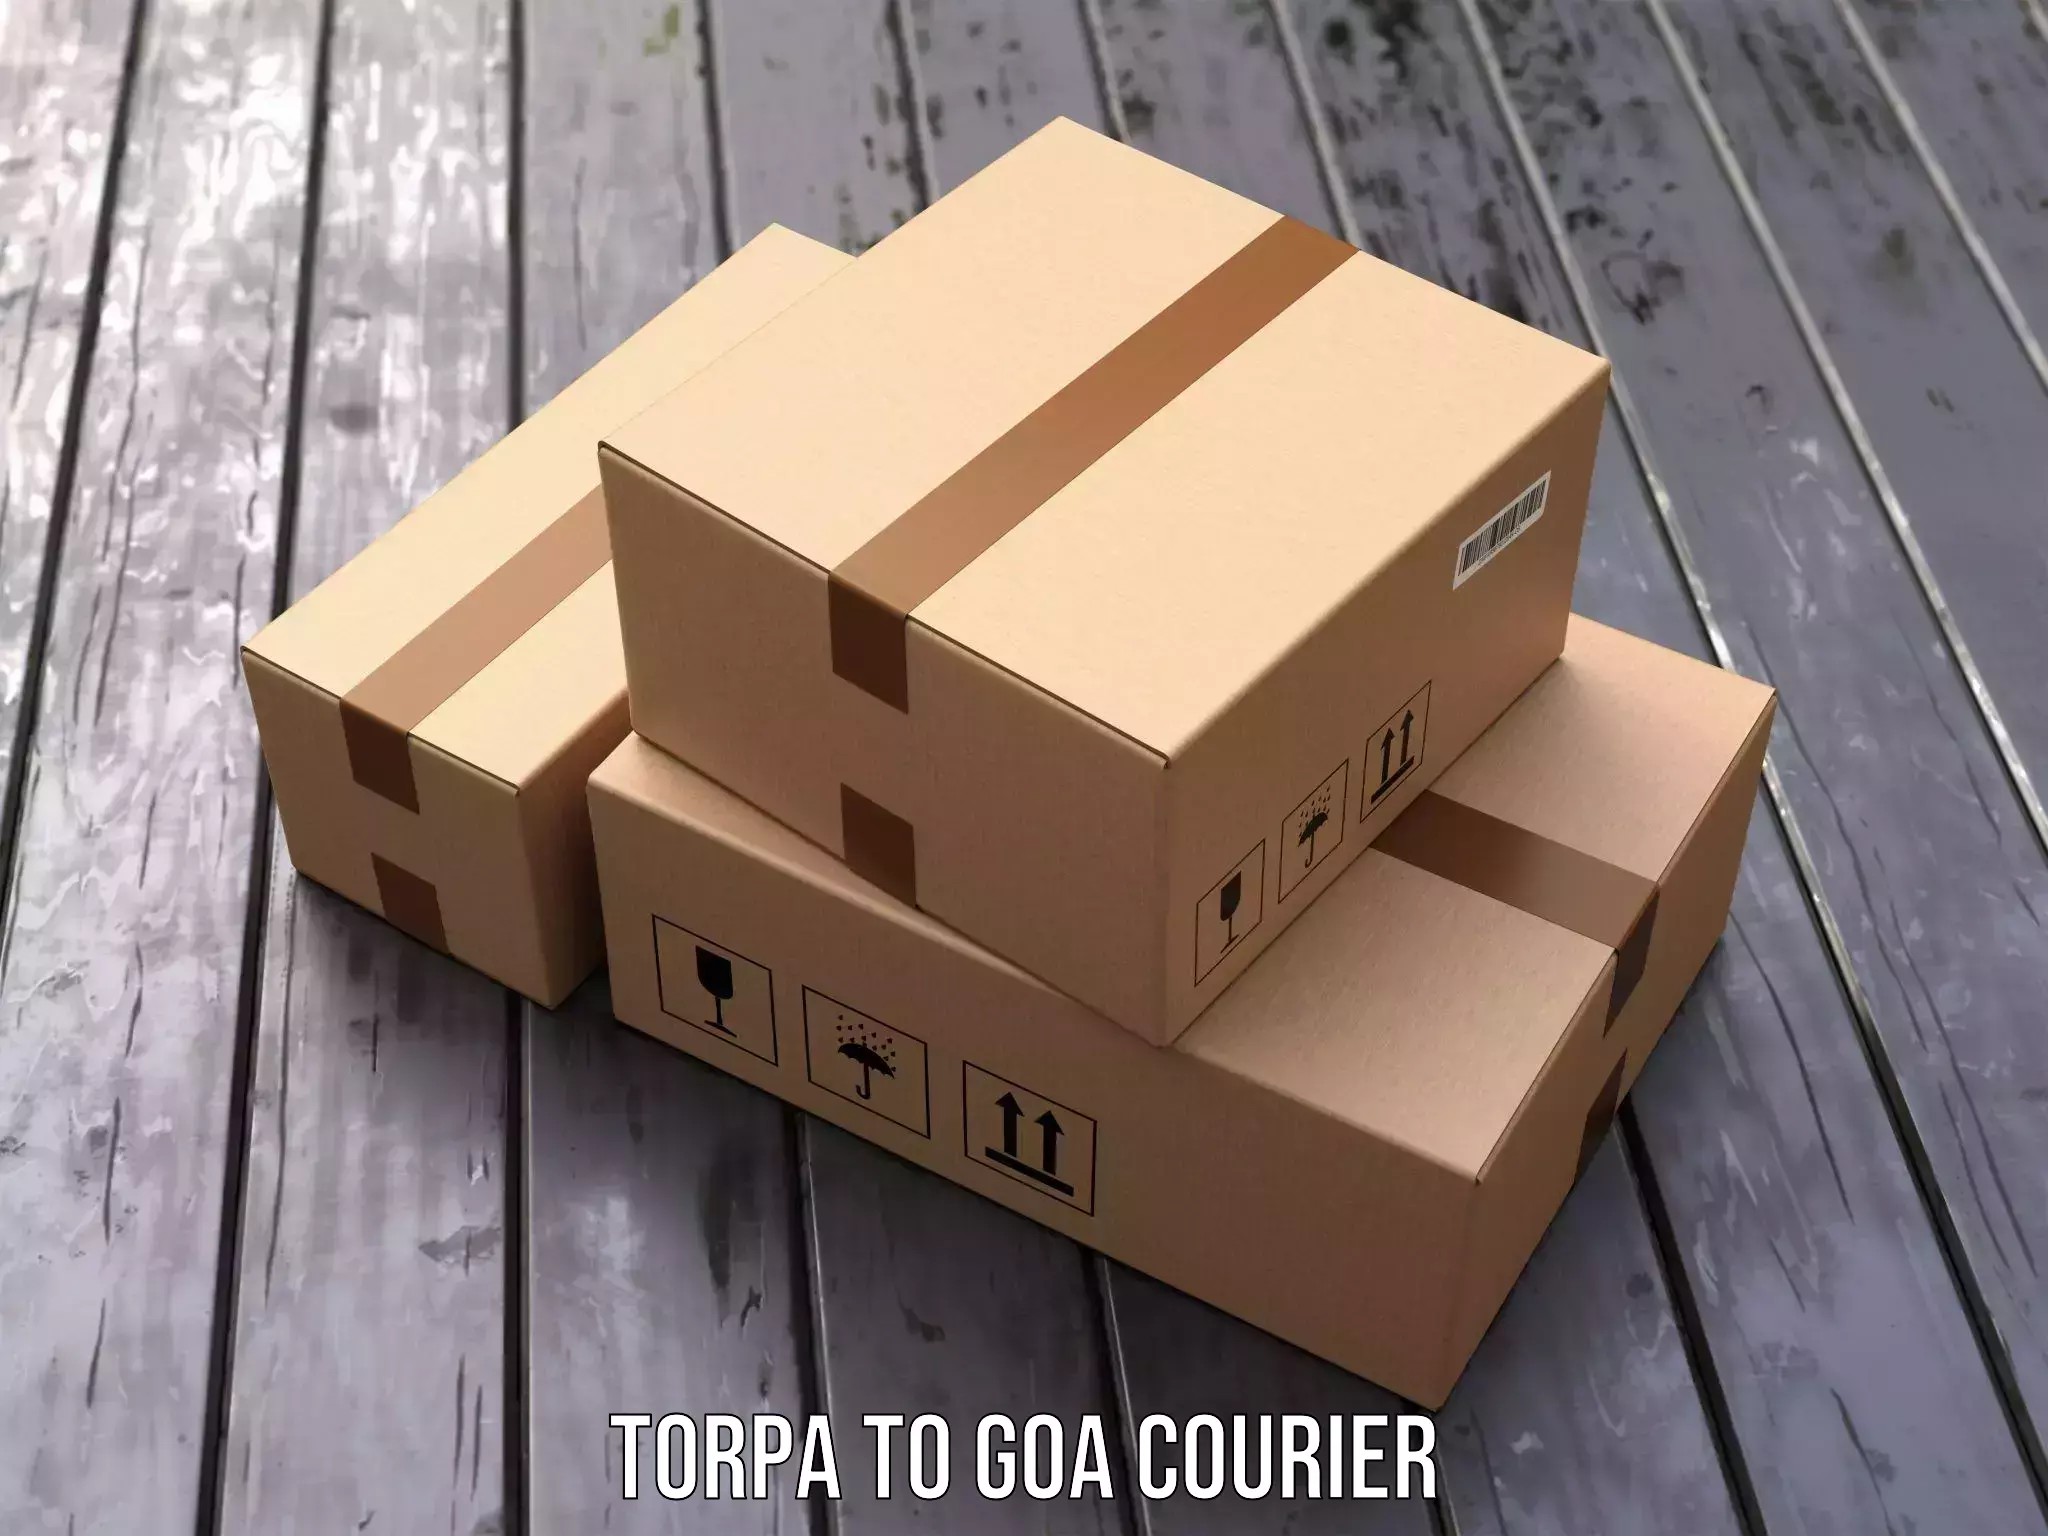 Rural area delivery Torpa to Goa